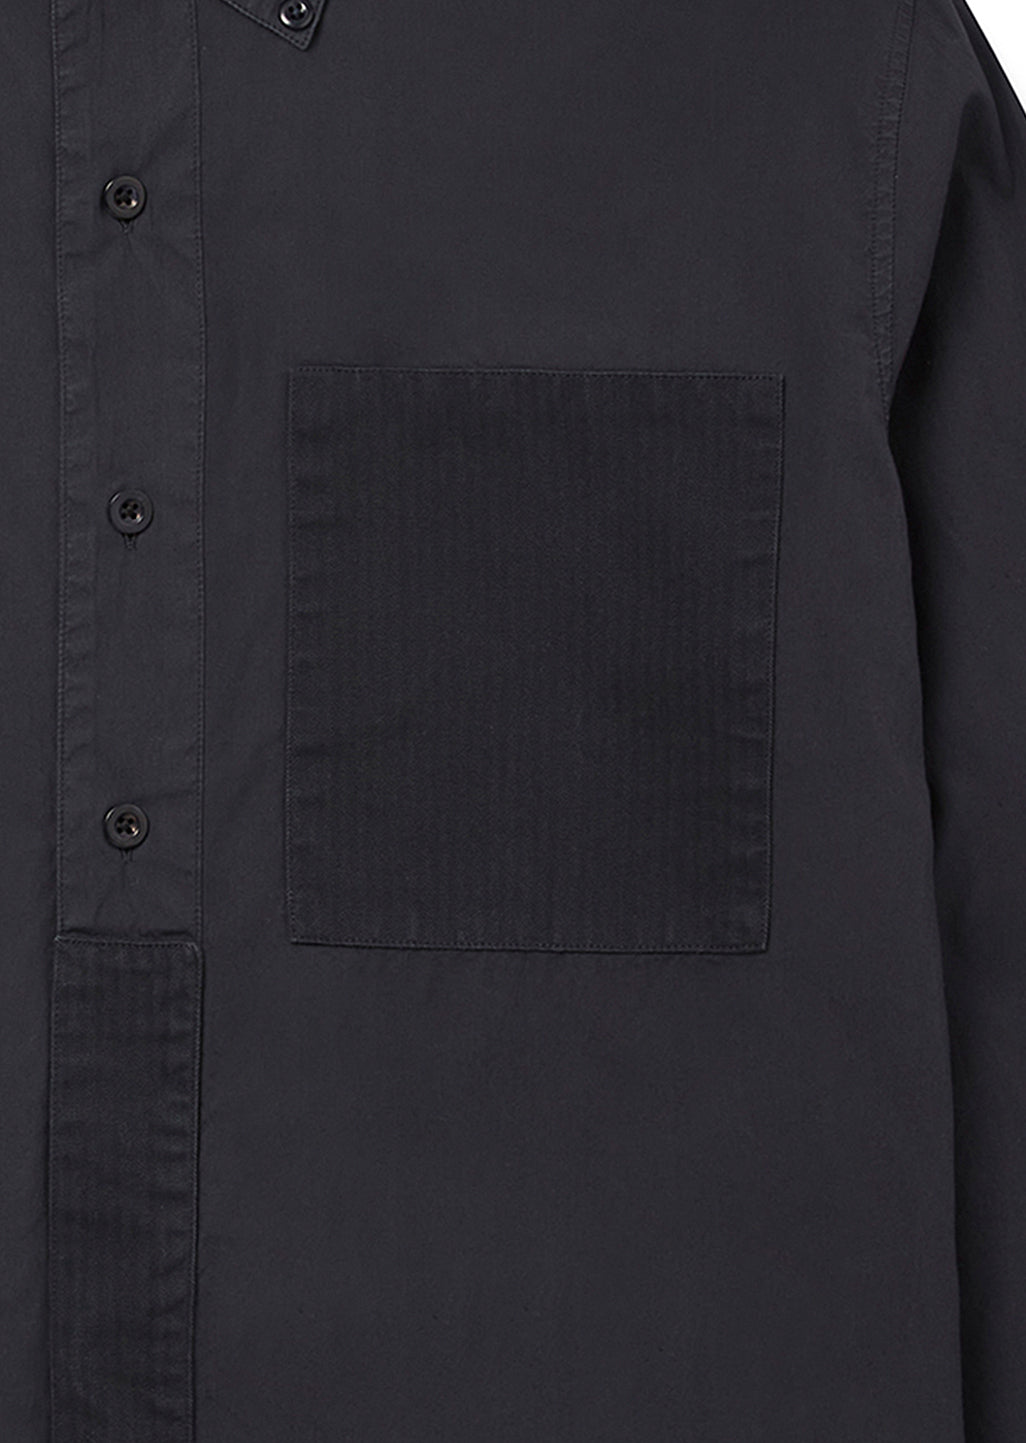 Patchwork LS Shirt in Charcoal – albam Clothing